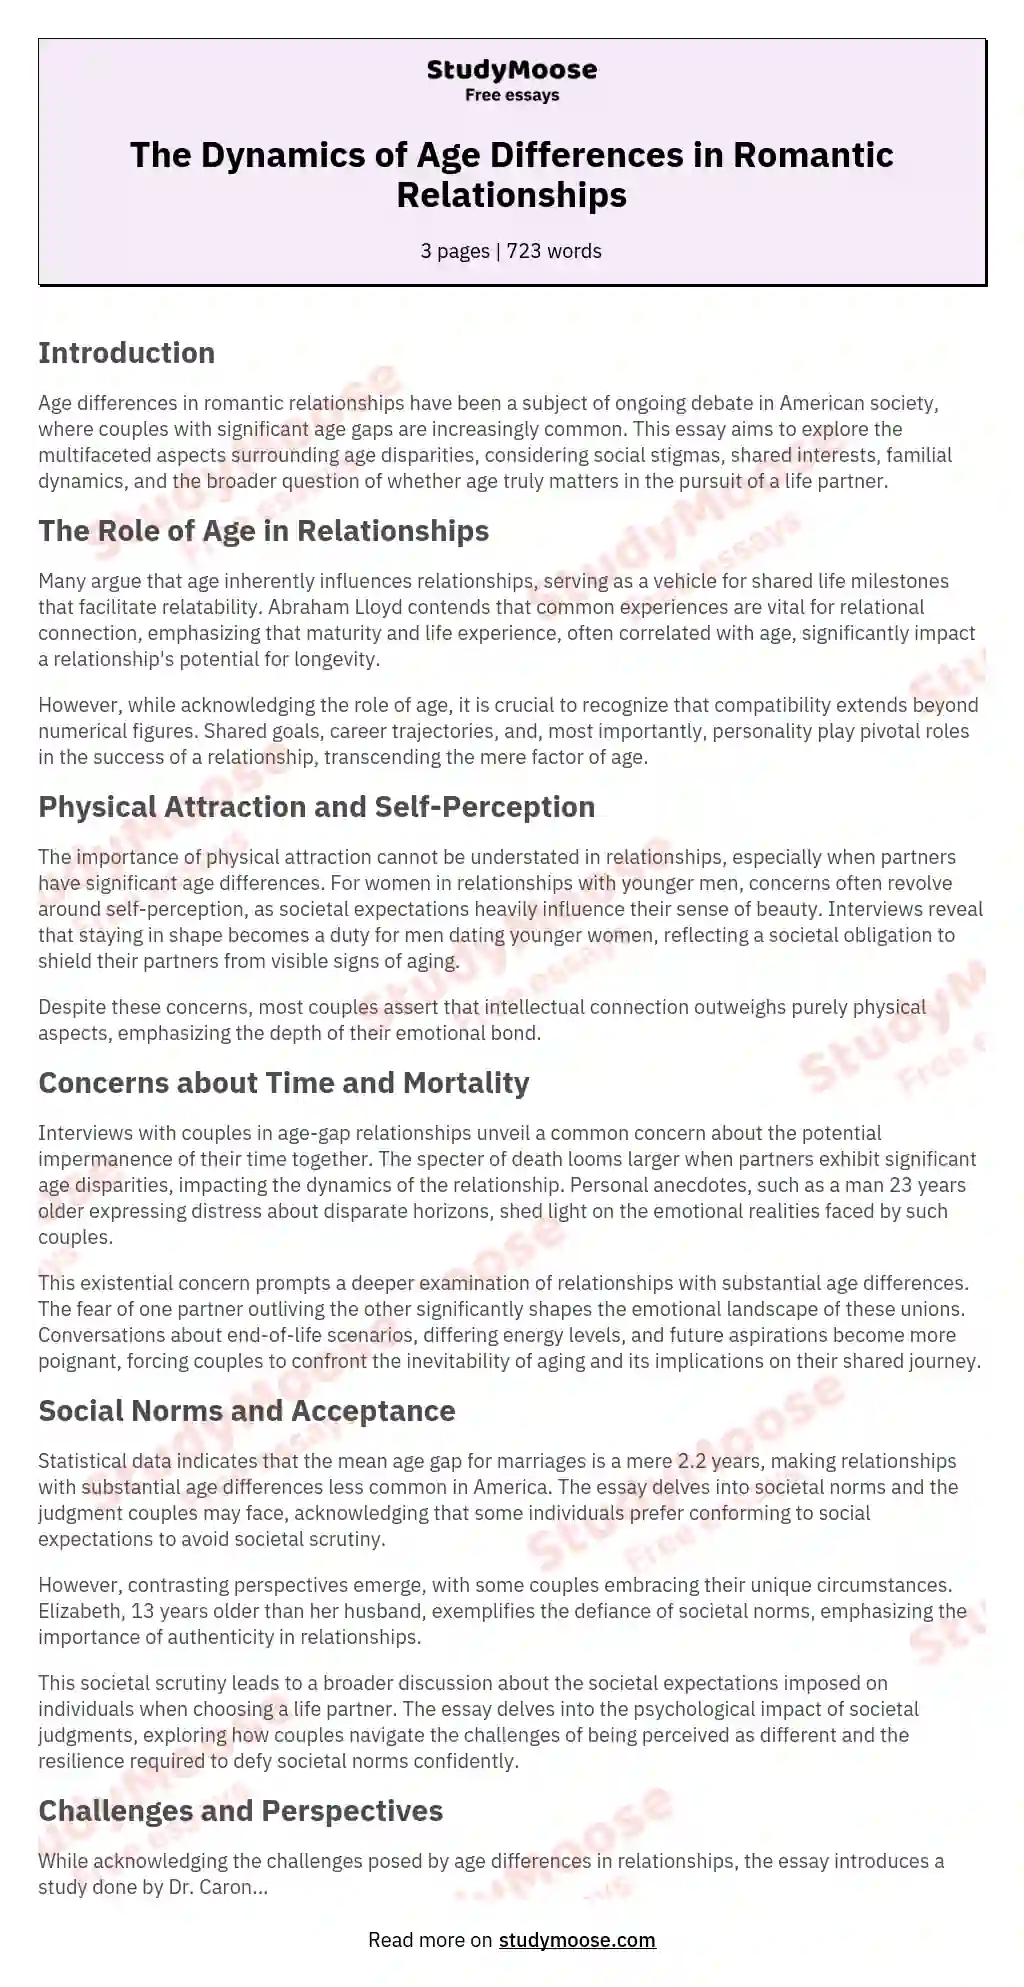 The Dynamics of Age Differences in Romantic Relationships essay